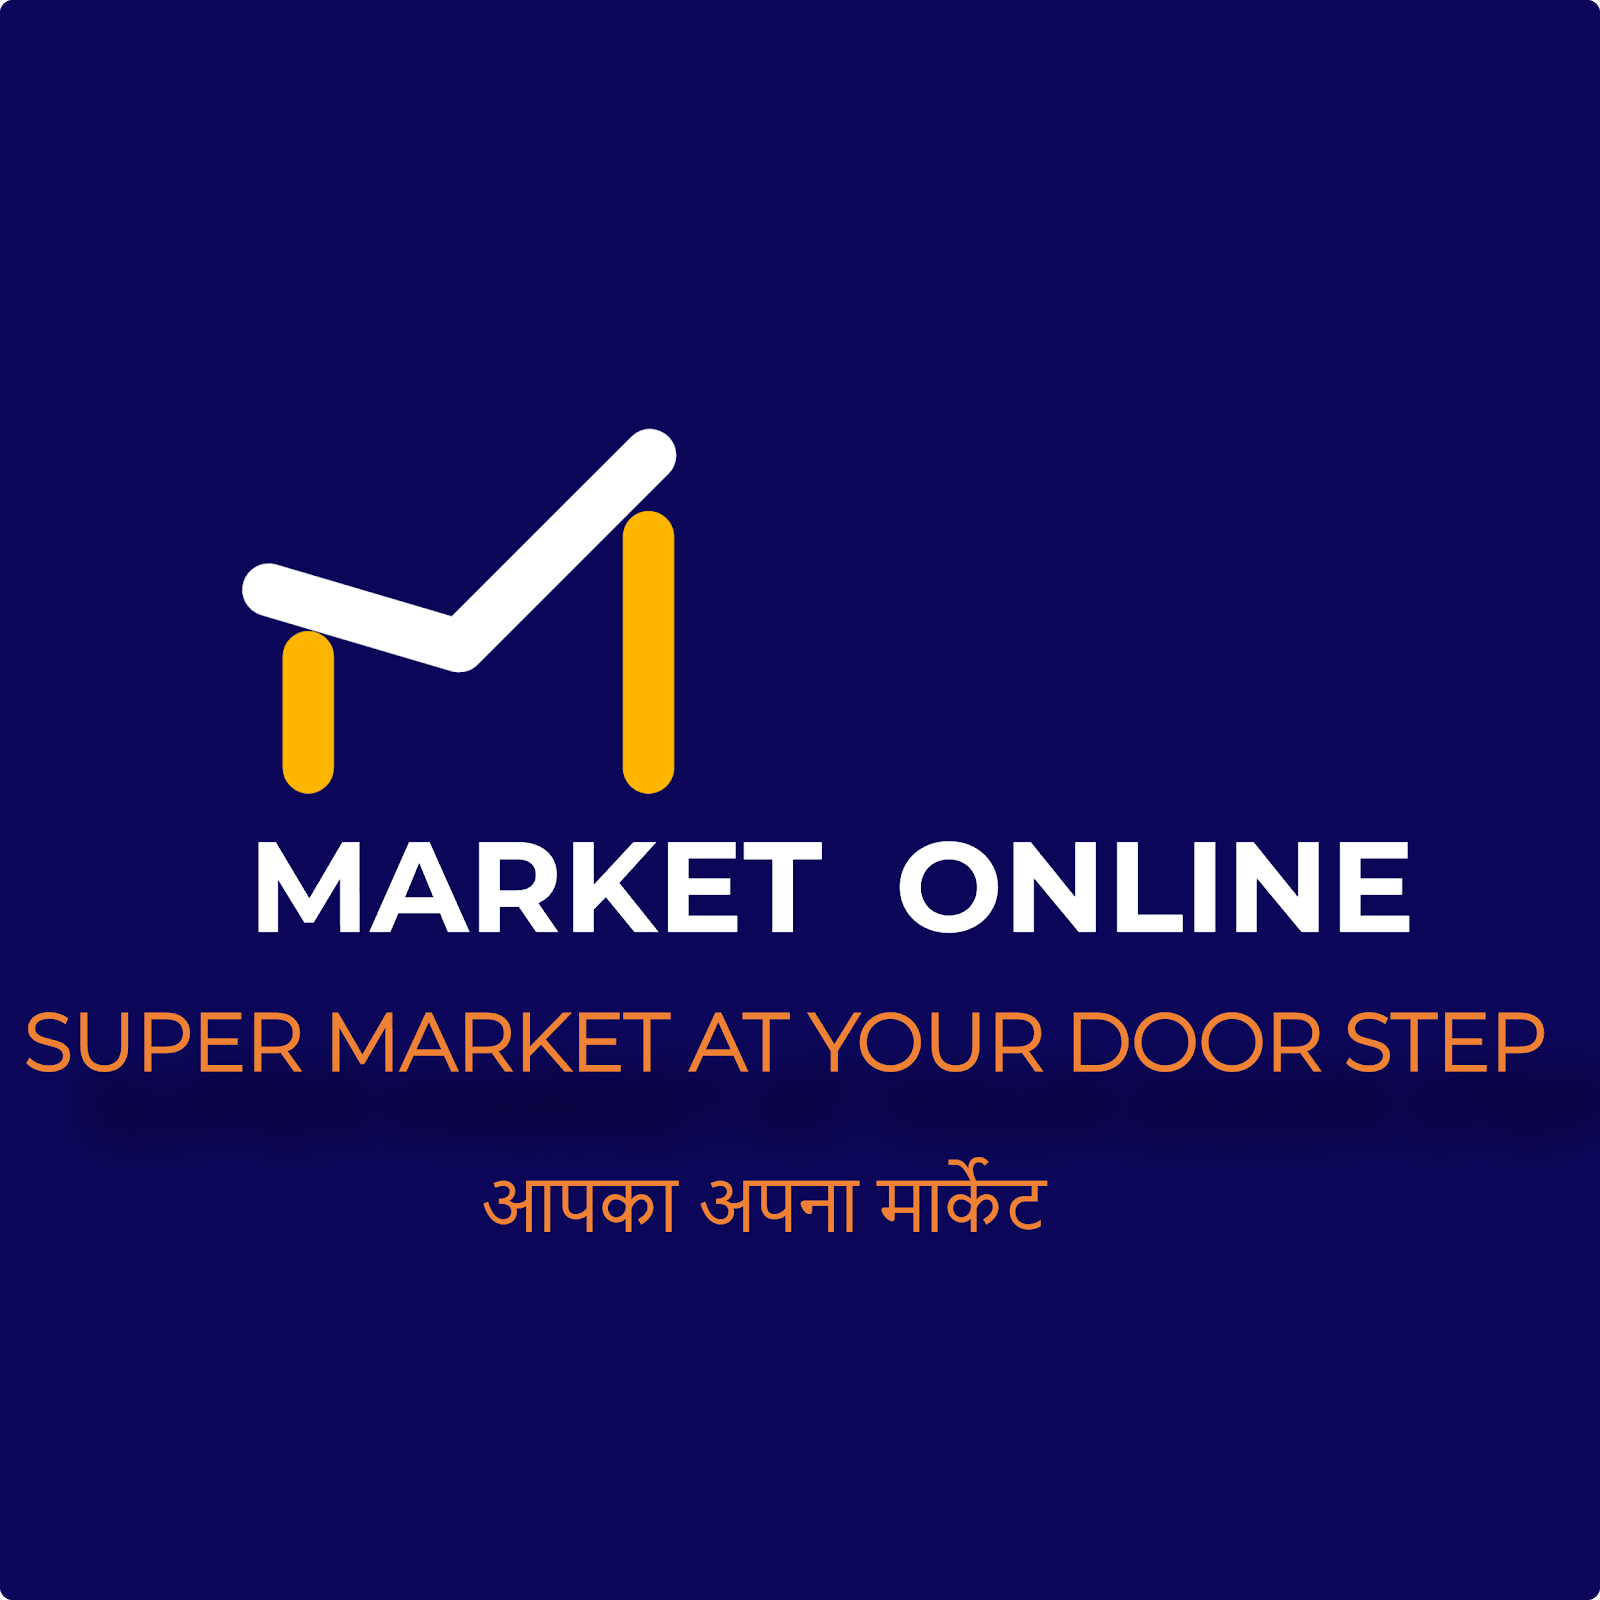 Super Market at your Door Step - Best Shopping Experience for Indians